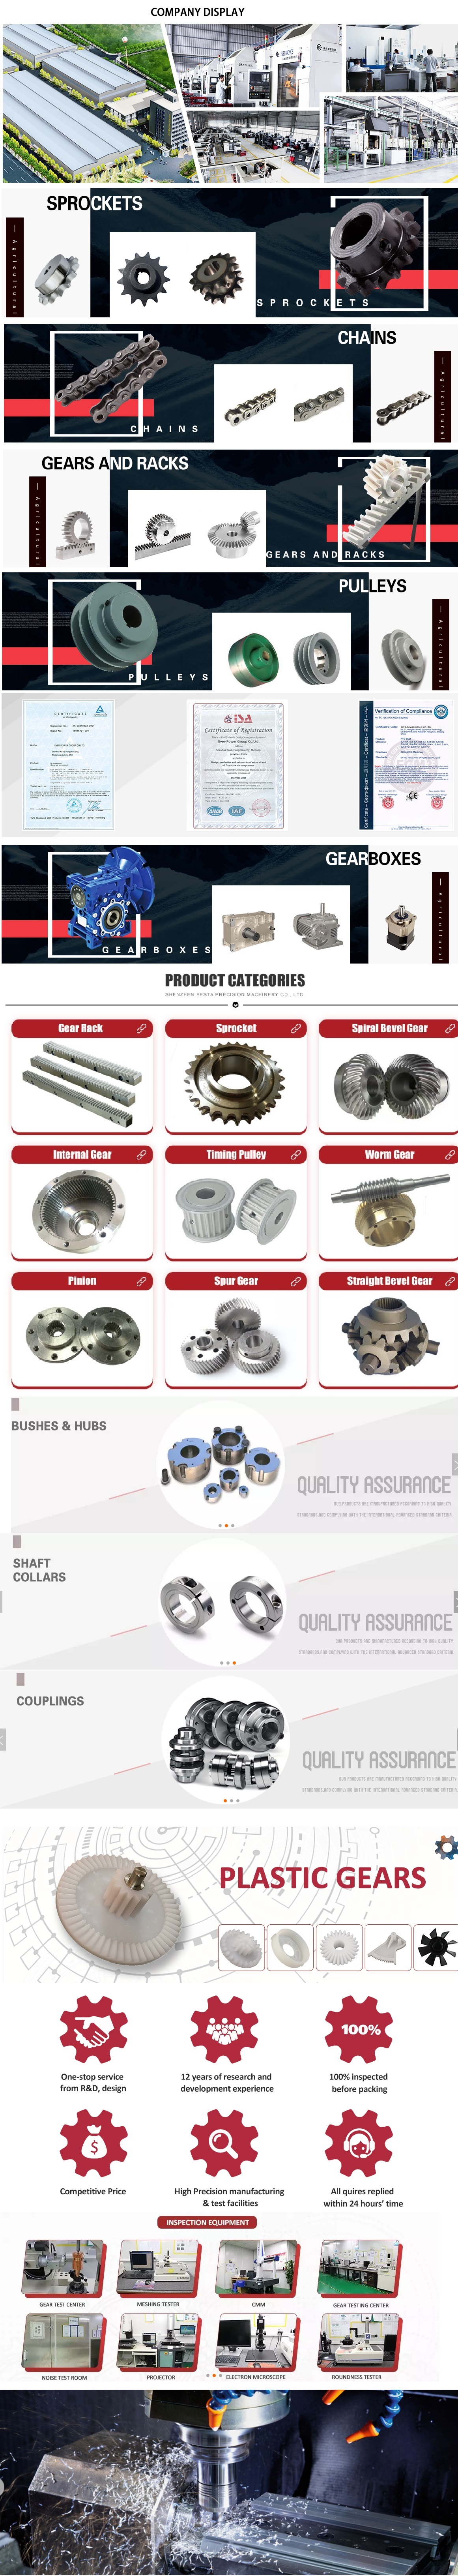   in London Canada  sales   price   shop   near me   near me shop   factory   supplier Original Fast Gear Truck Spare Parts 2ND Shaft Combined Bearing Js220-1707109 manufacturer   best   Cost   Custom   Cheap   wholesaler 